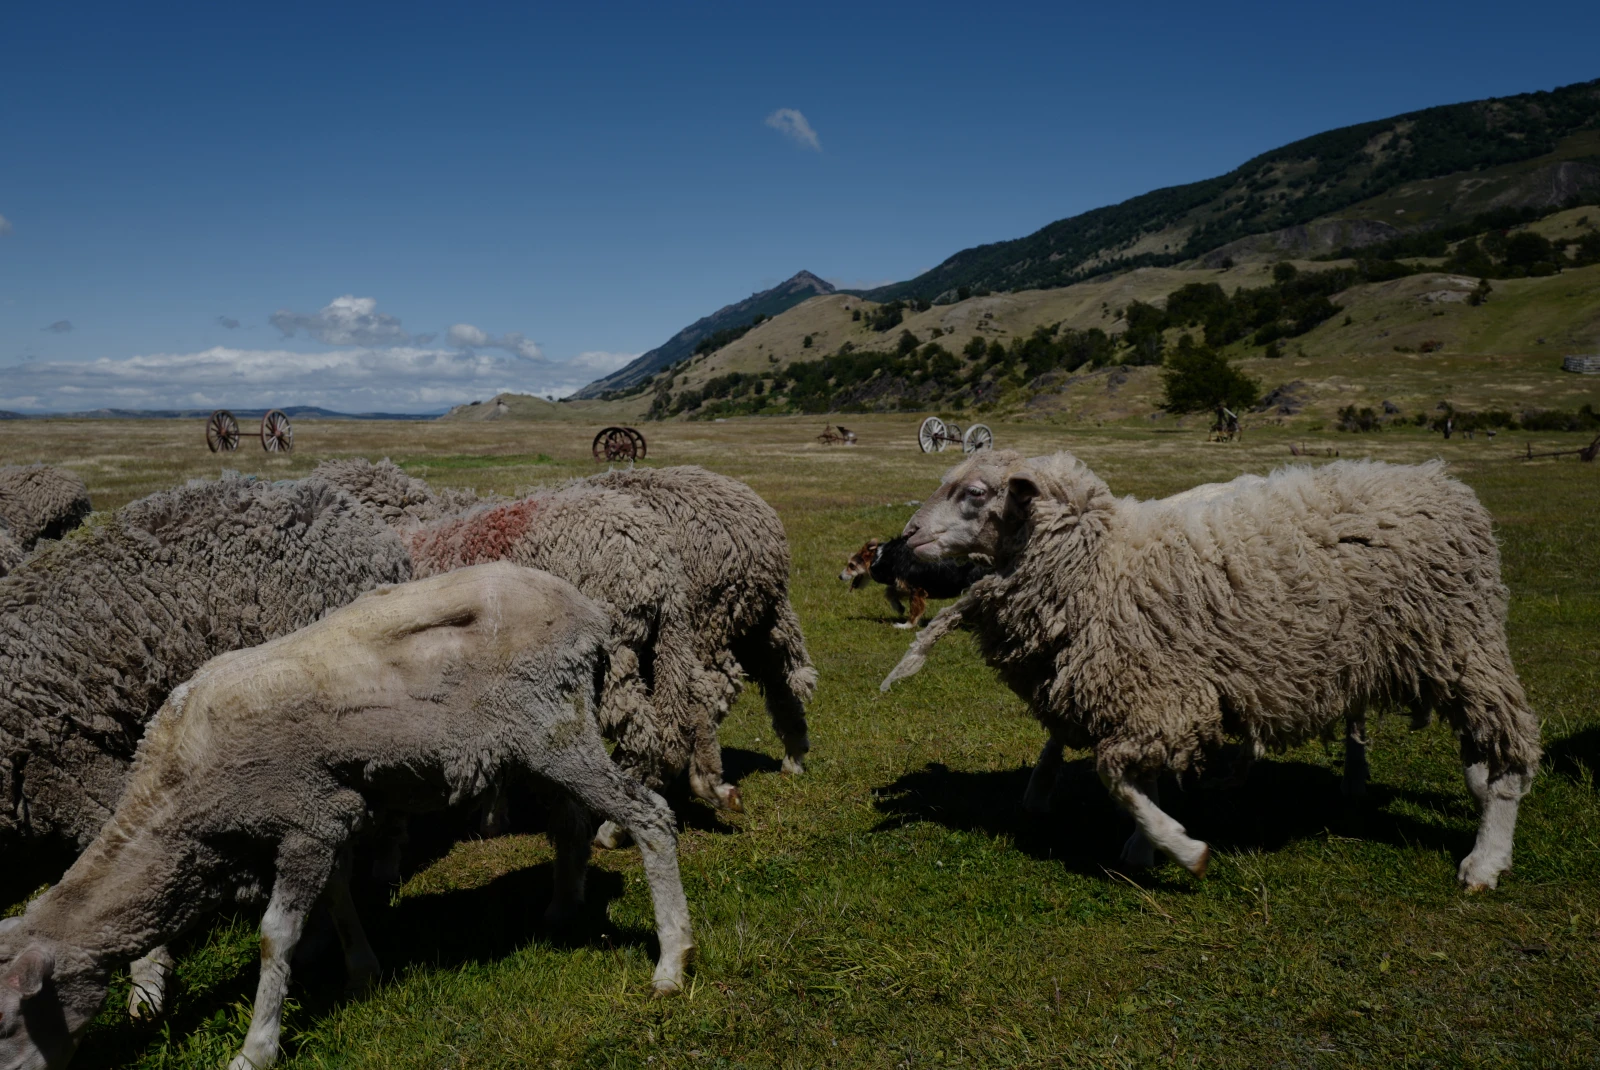 Some lamb in a field in Patagonia.